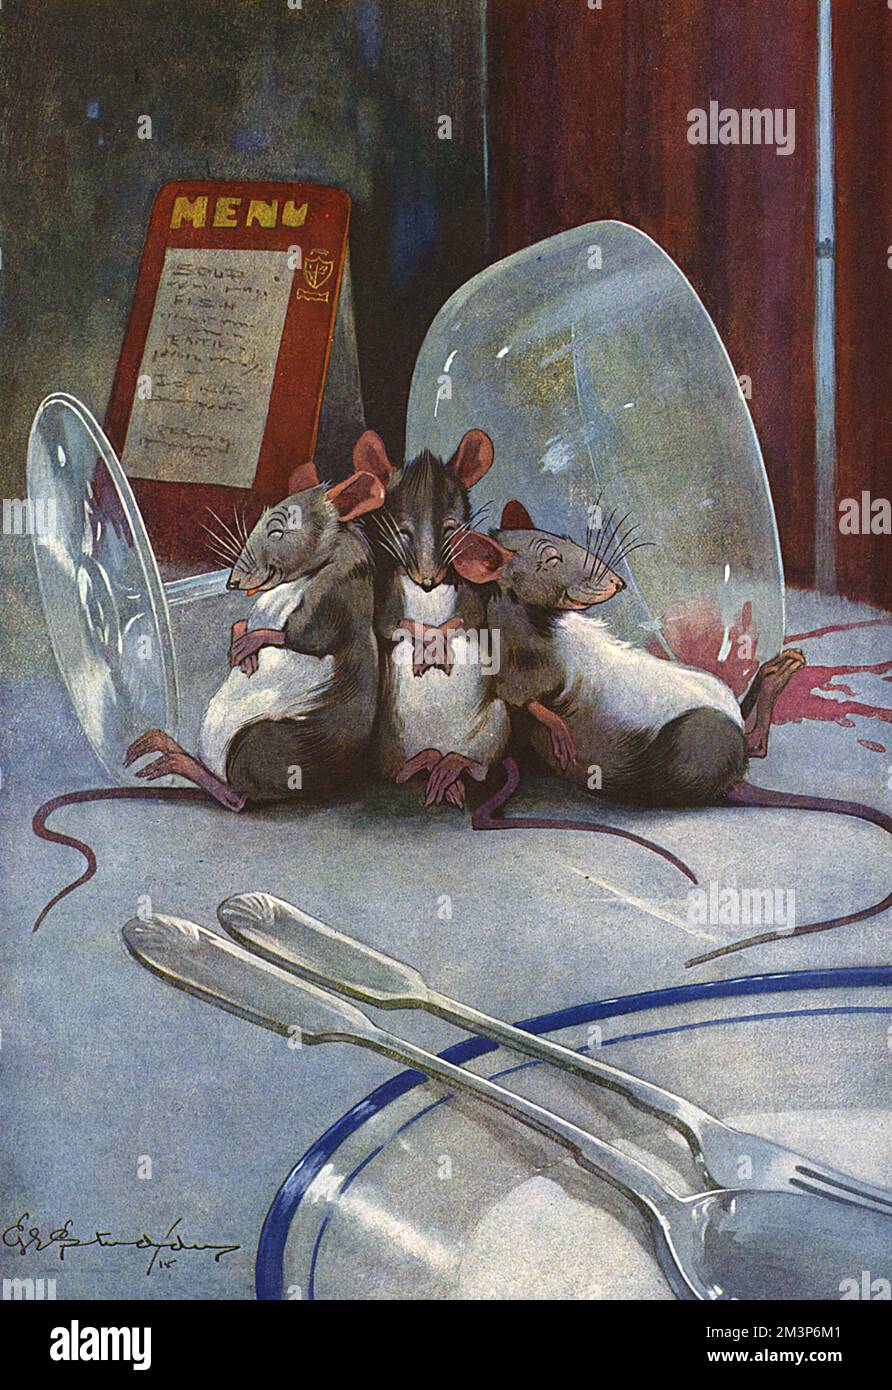 Three little mice, somewhat the worse for wear having polished off a glass of wine at an empty restaurant table.       Date: 1915 Stock Photo